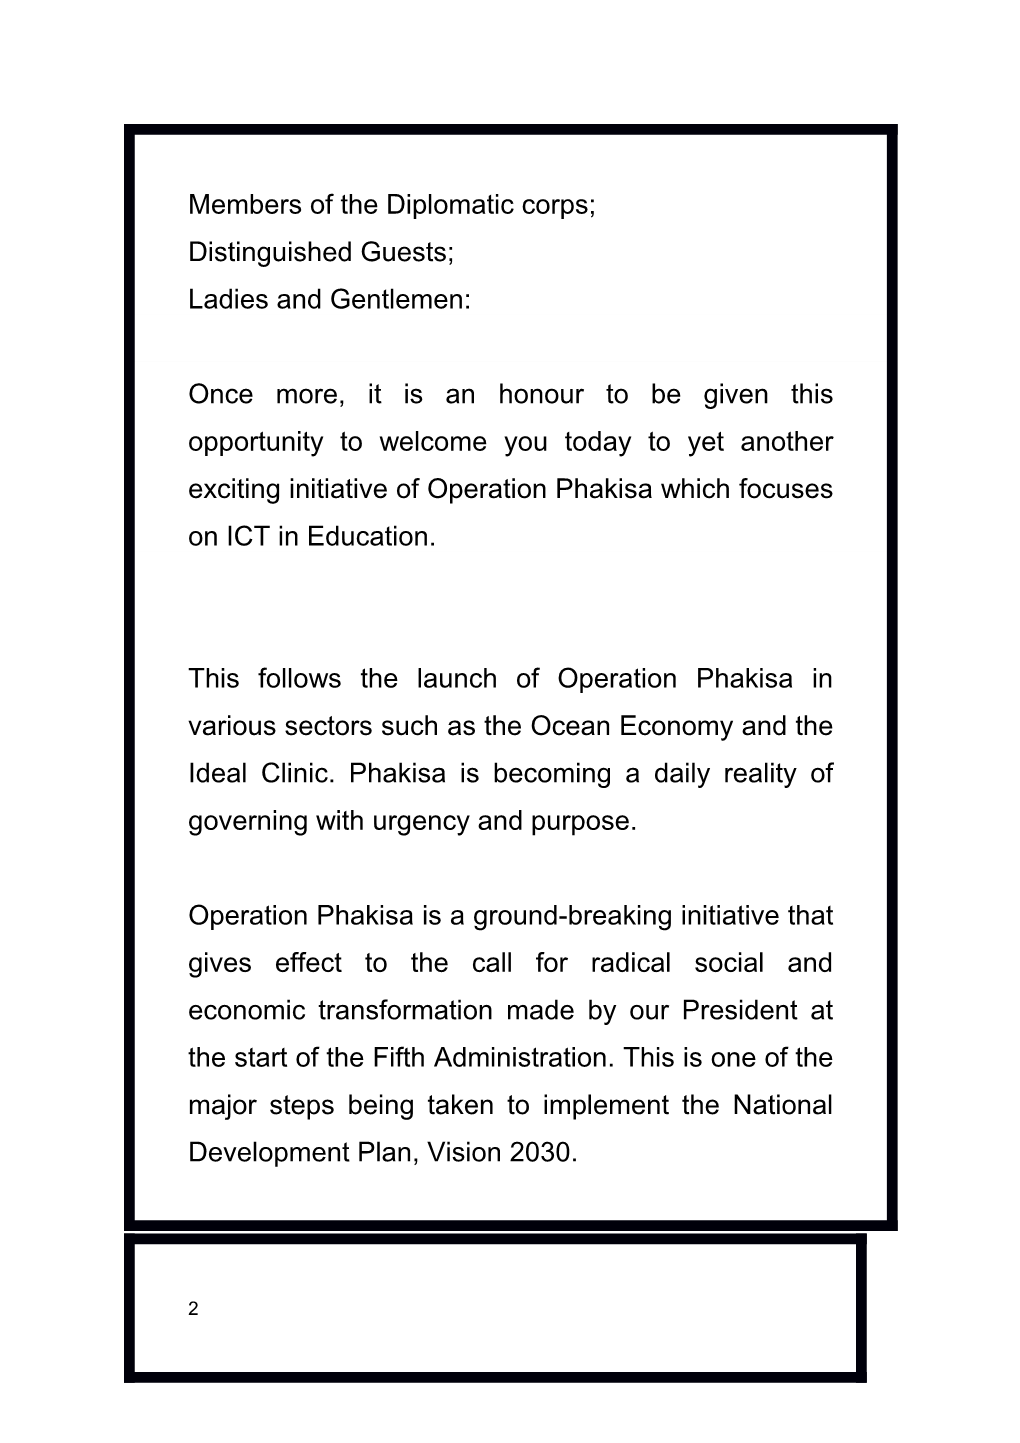 Opening Remarks at the Launch of Operation Phakisa on ICT in Education